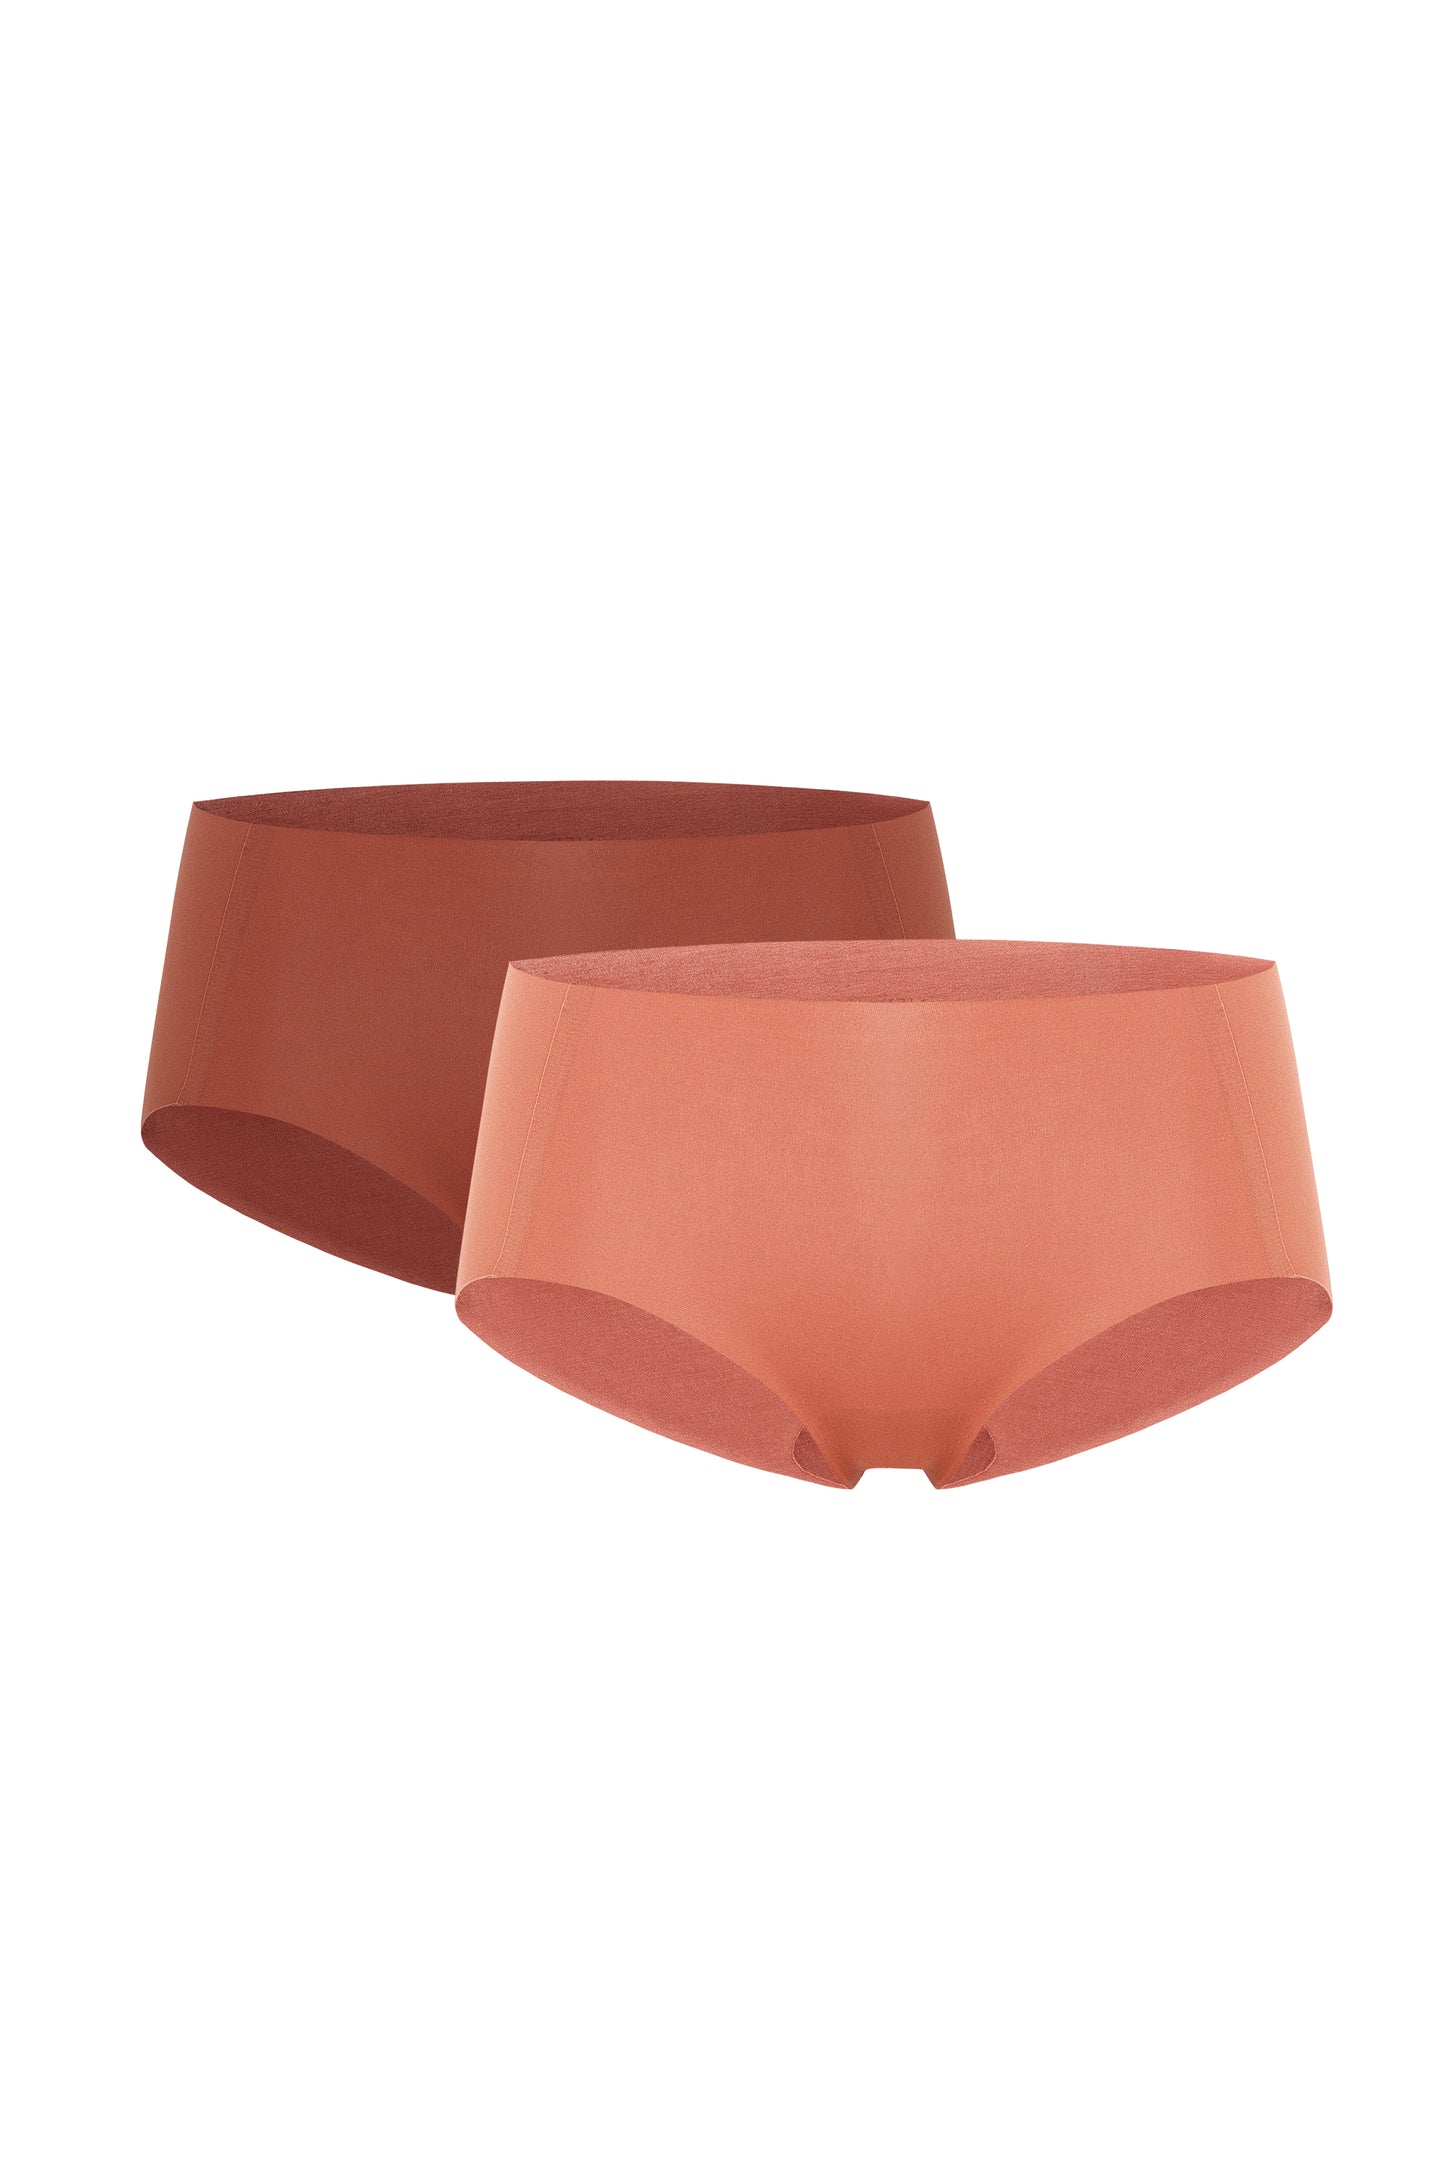 two briefs in rust and orange